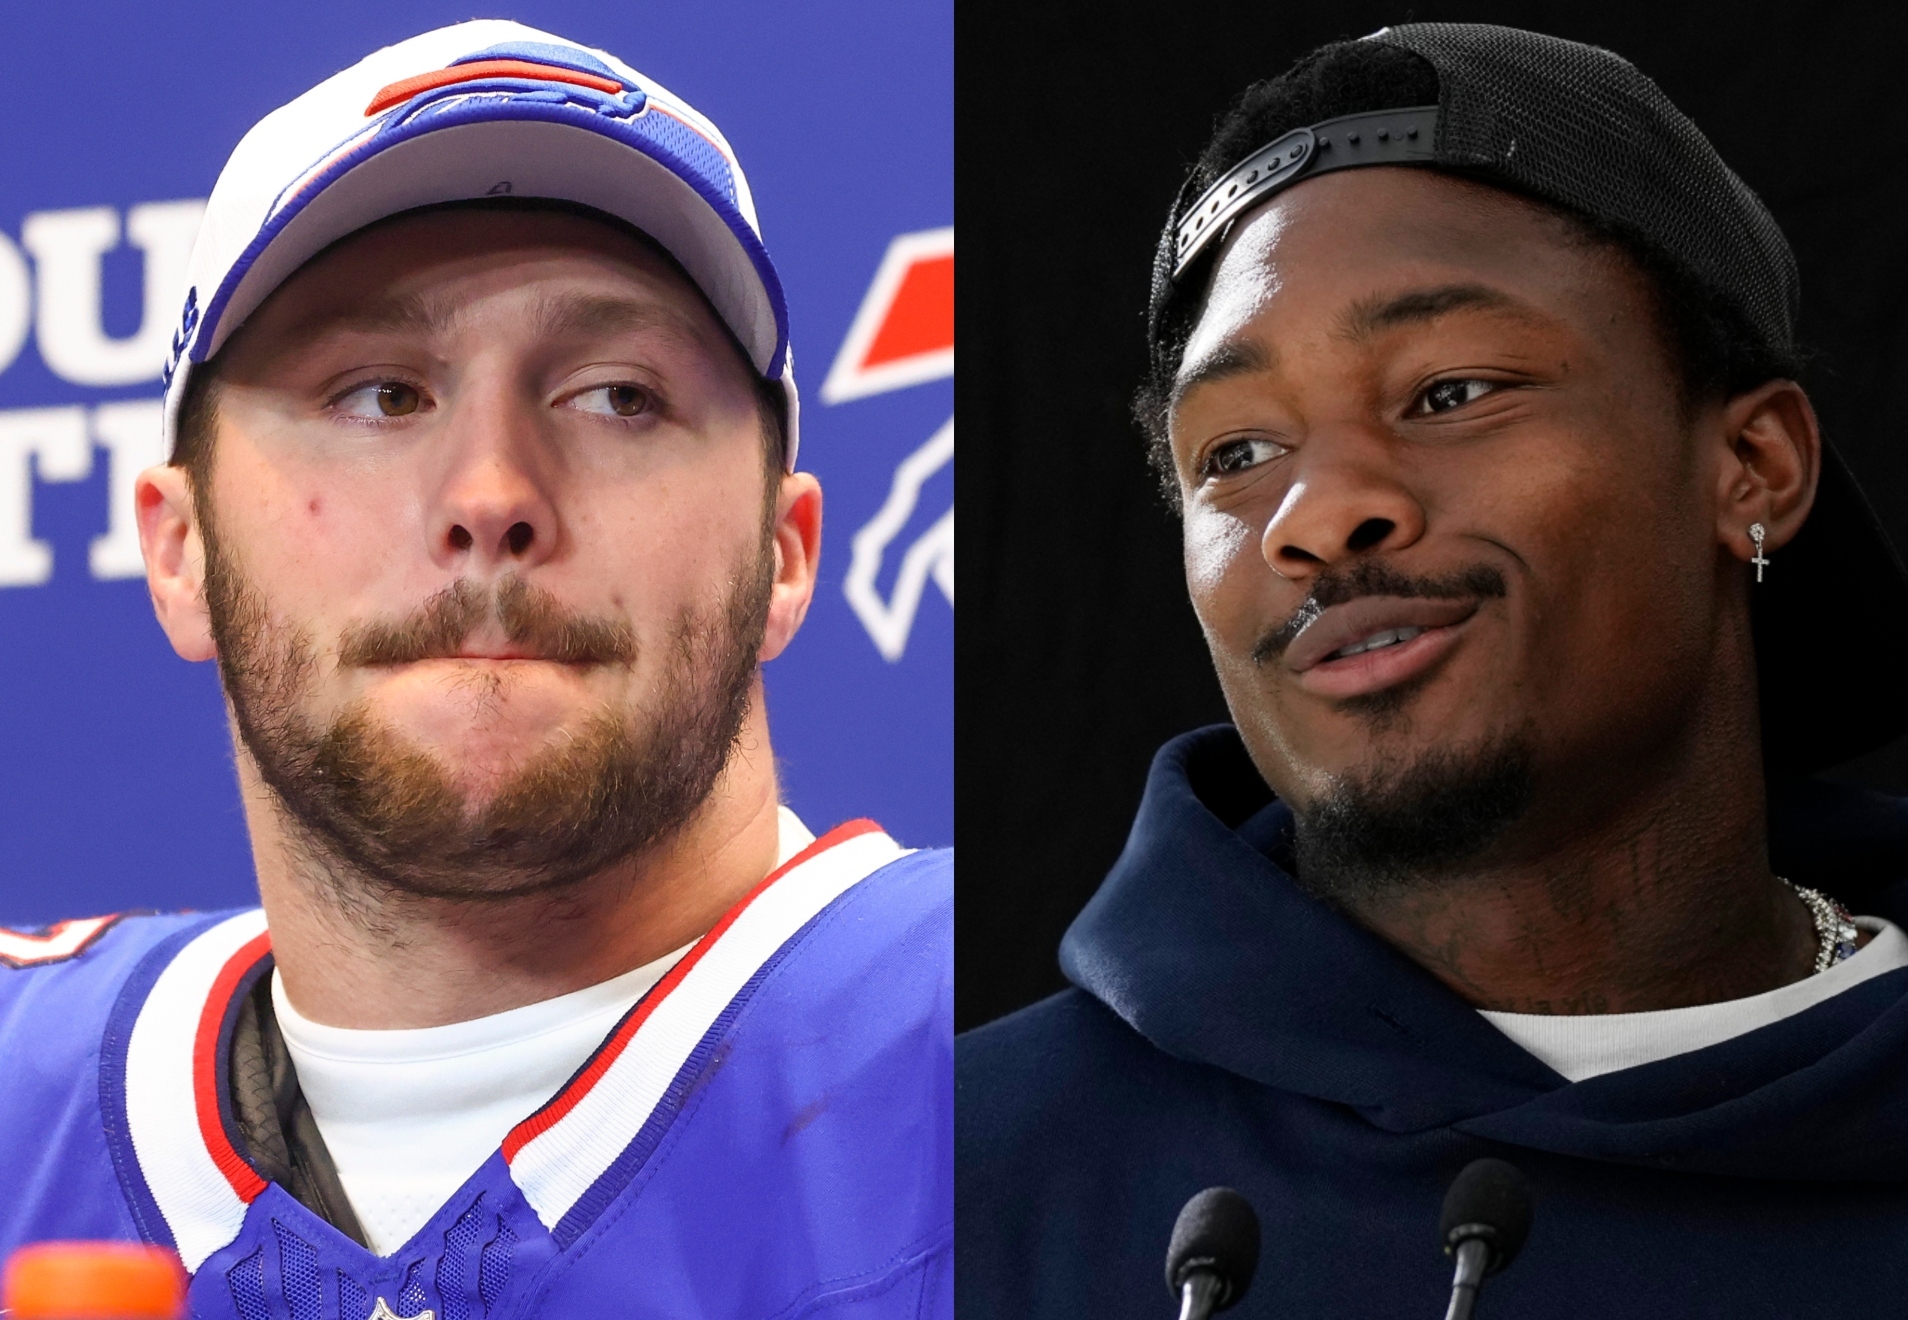 Did a text message lead to the Bills-Texans trade?